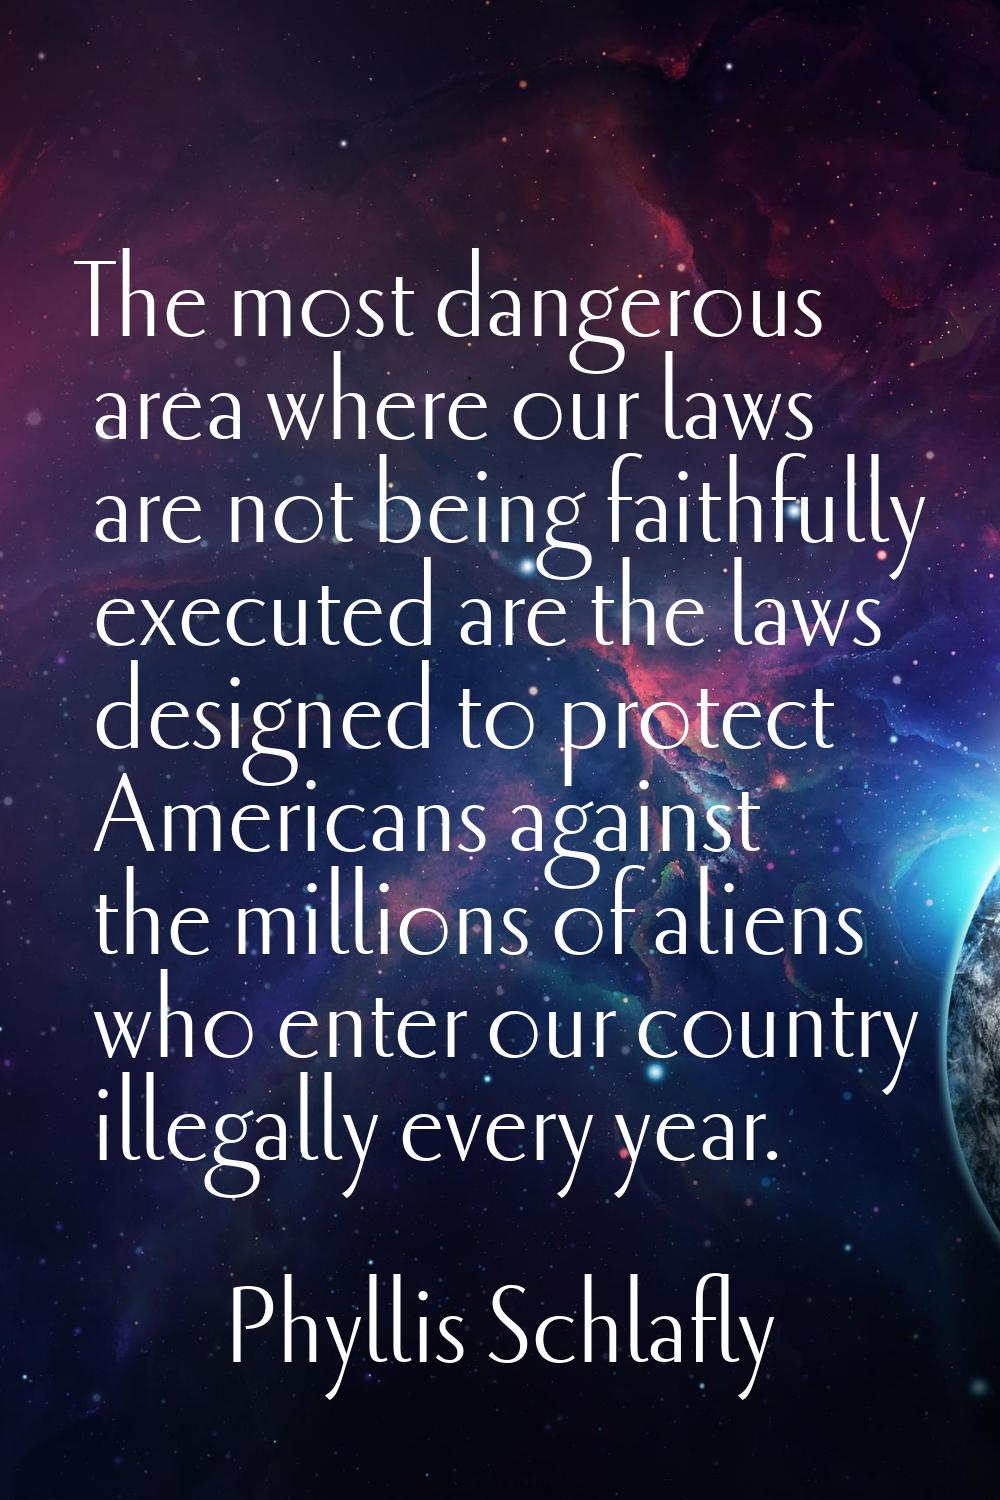 The most dangerous area where our laws are not being faithfully executed are the laws designed to p